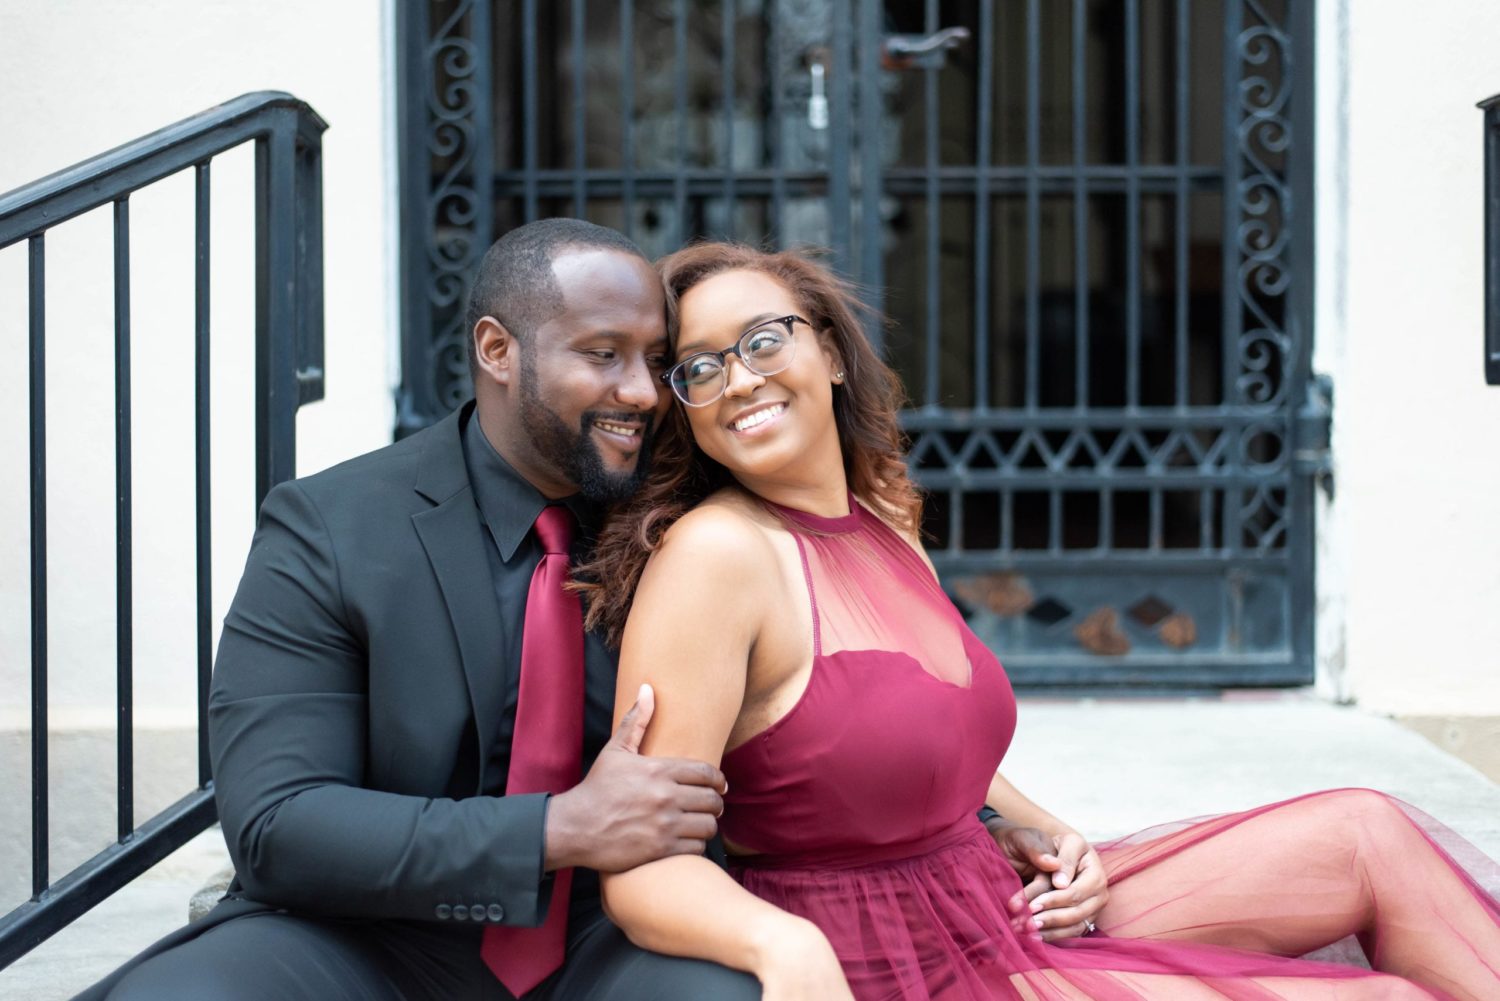 Le meridien engagement session in downtown tampa formal attire